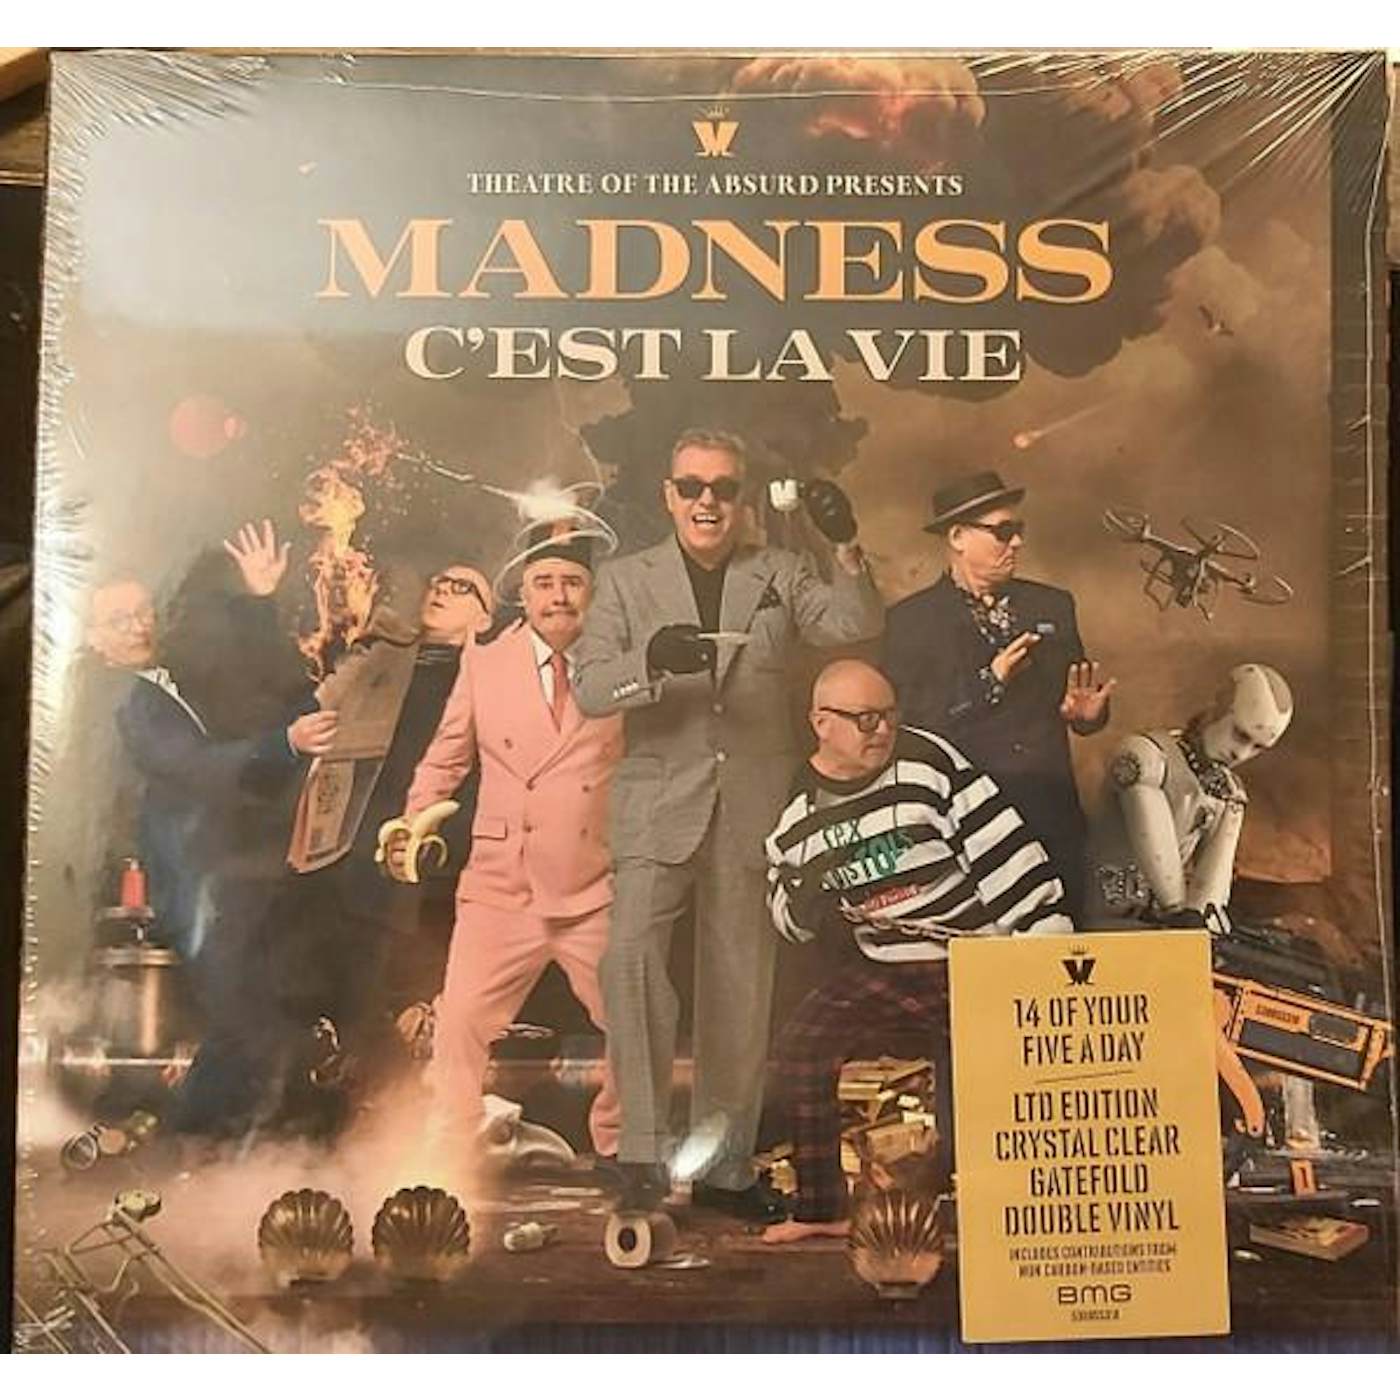 Madness THEATRE OF THE ABSURD PRESENTS C'EST LA VIE (X) (2LP/LIMITED EDITION/CRYSTAL CLEAR VINYL) Vinyl Record